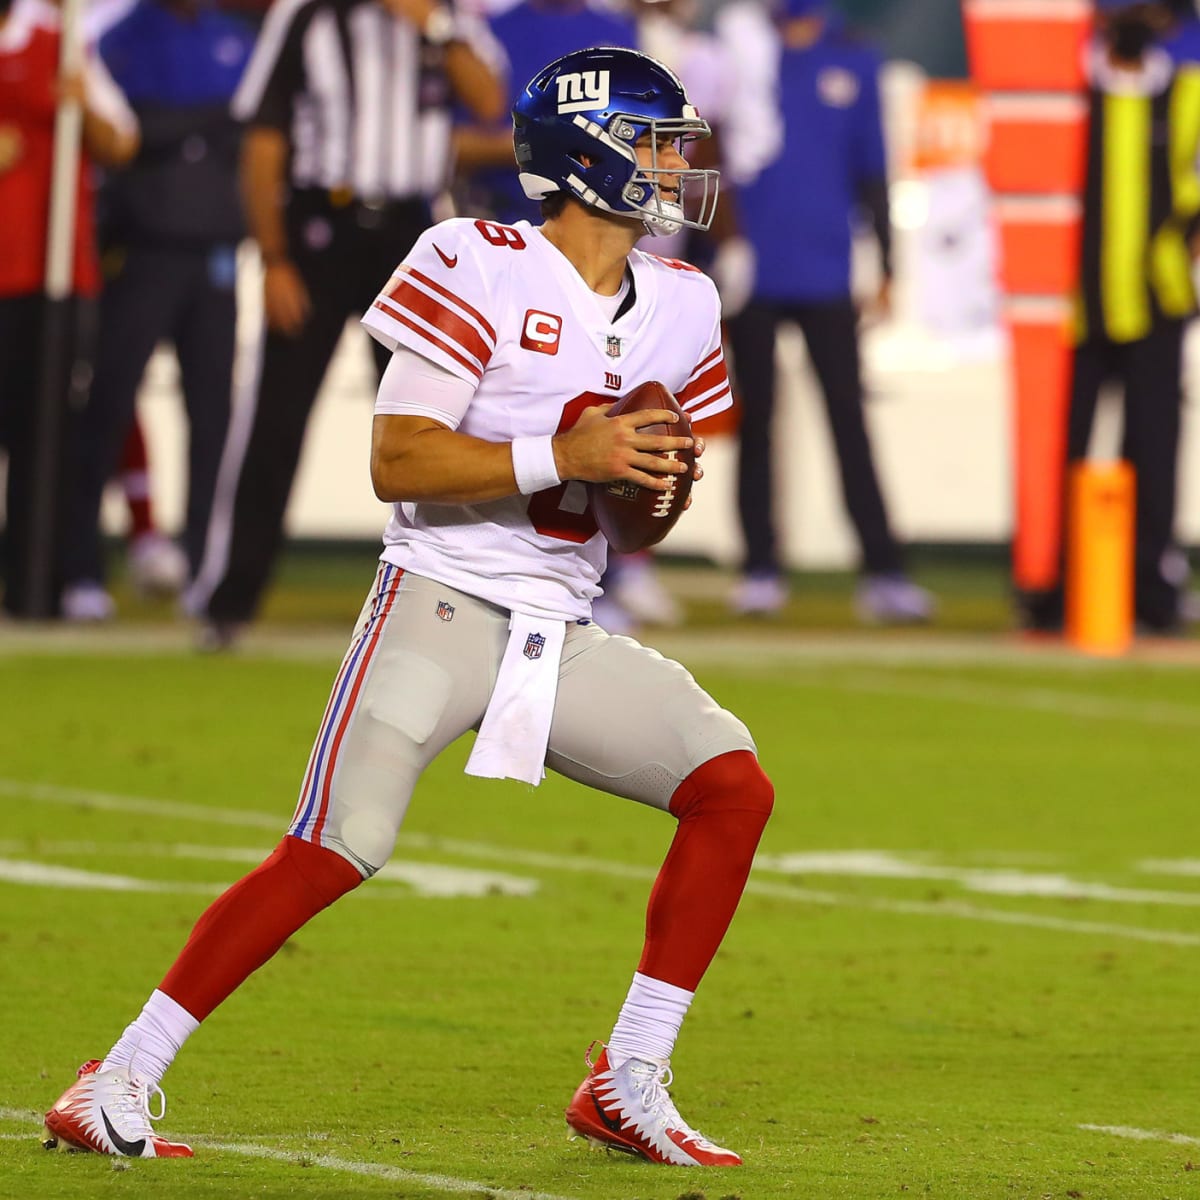 Giants' QB Daniel Jones suffered a neck injury and is OUT for the remainder  of the game.